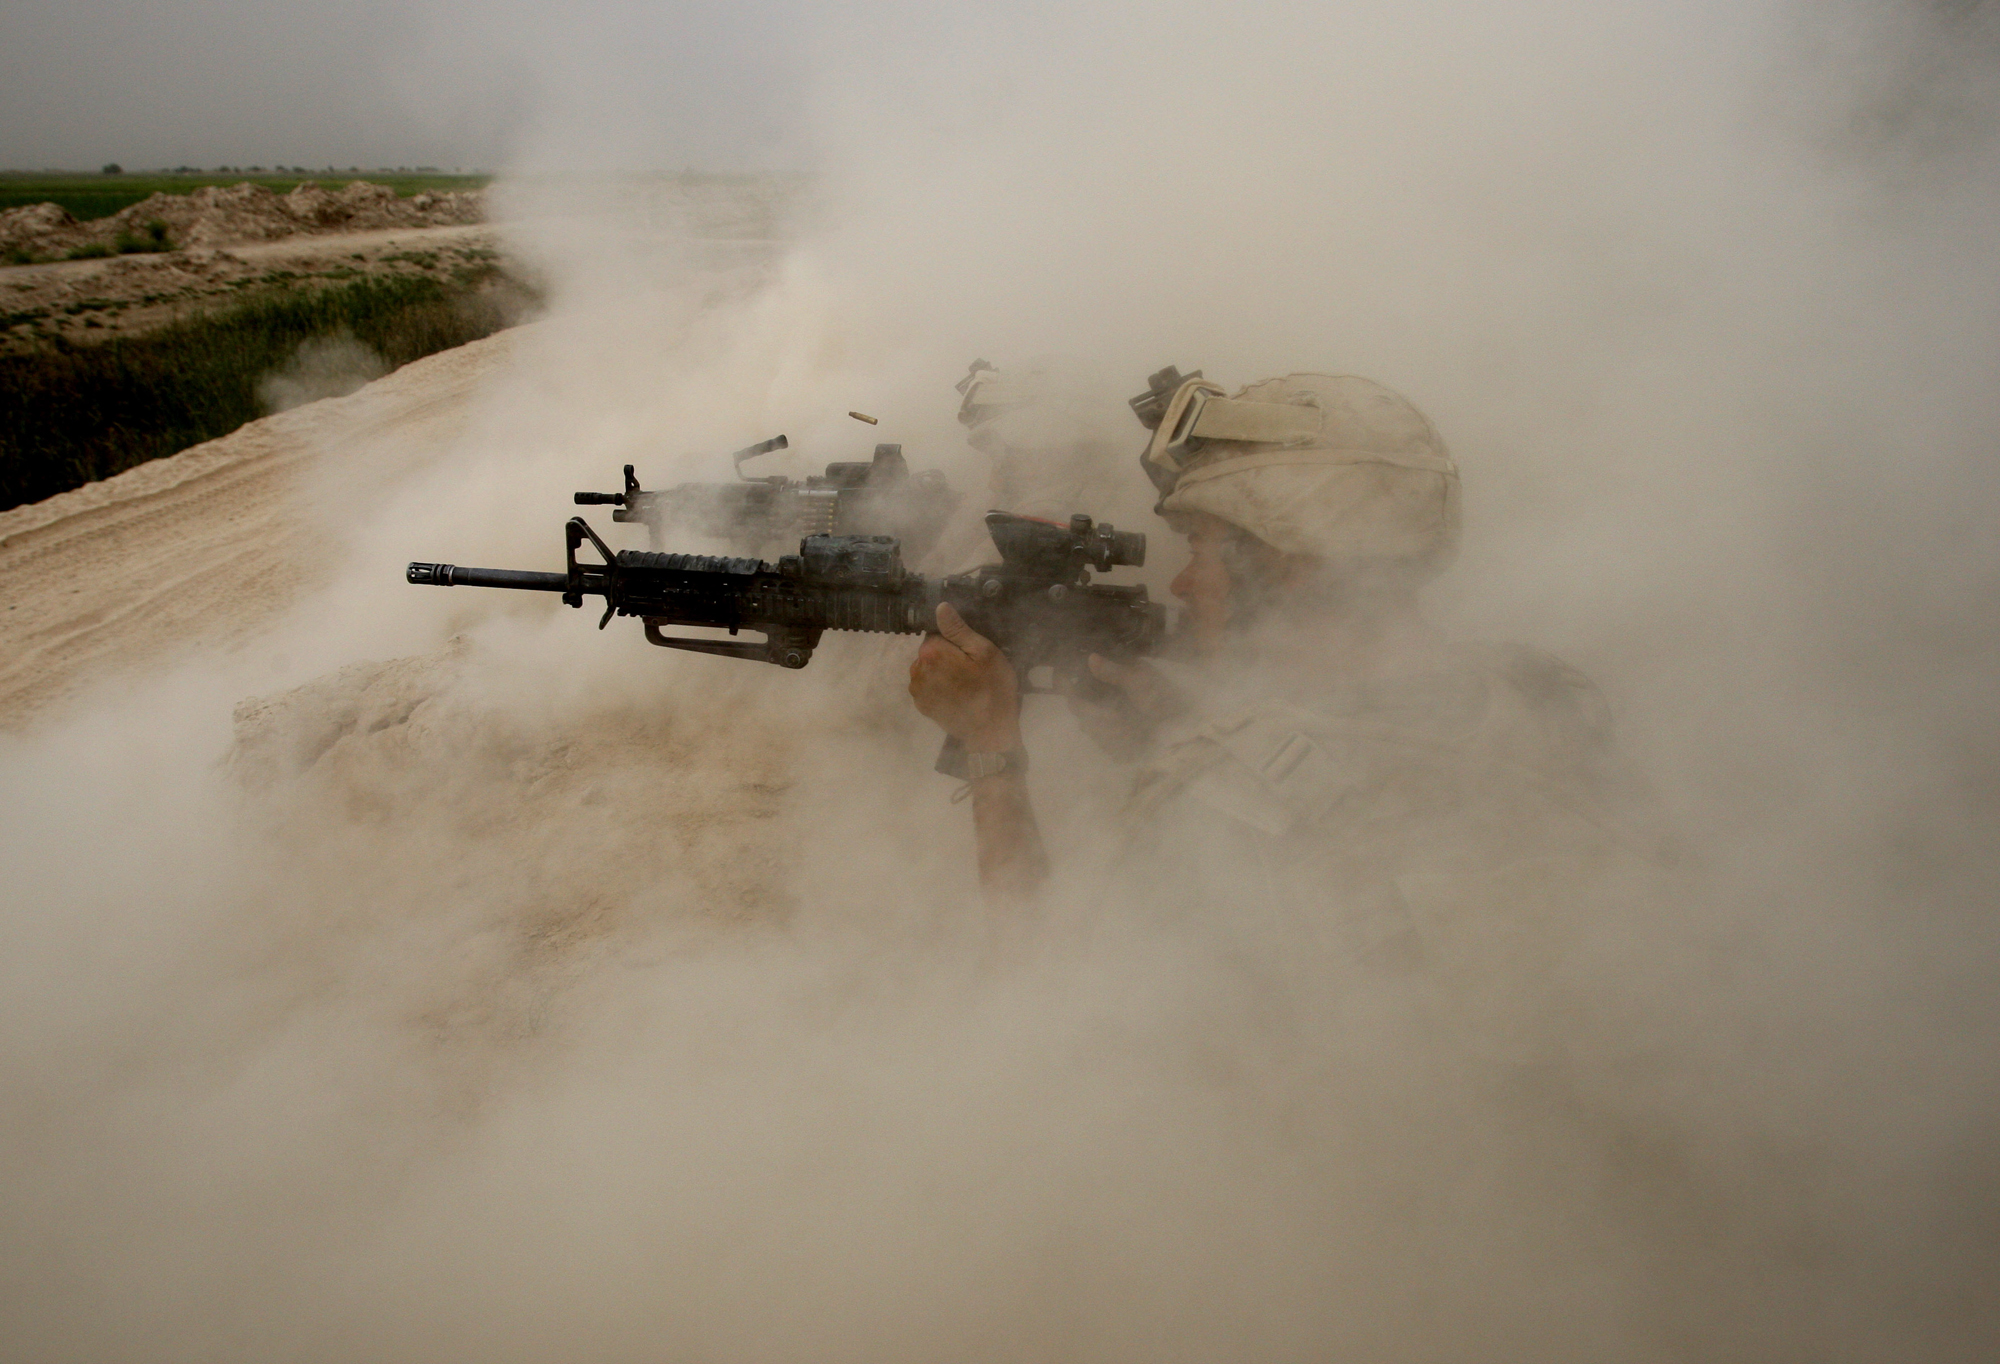 U.S. Marines, from the 24th Marine Expeditionary Unit, return fire on Taliban positions near the town of Garmser in Helmand Province of Afghanistan, May 2, 2008.